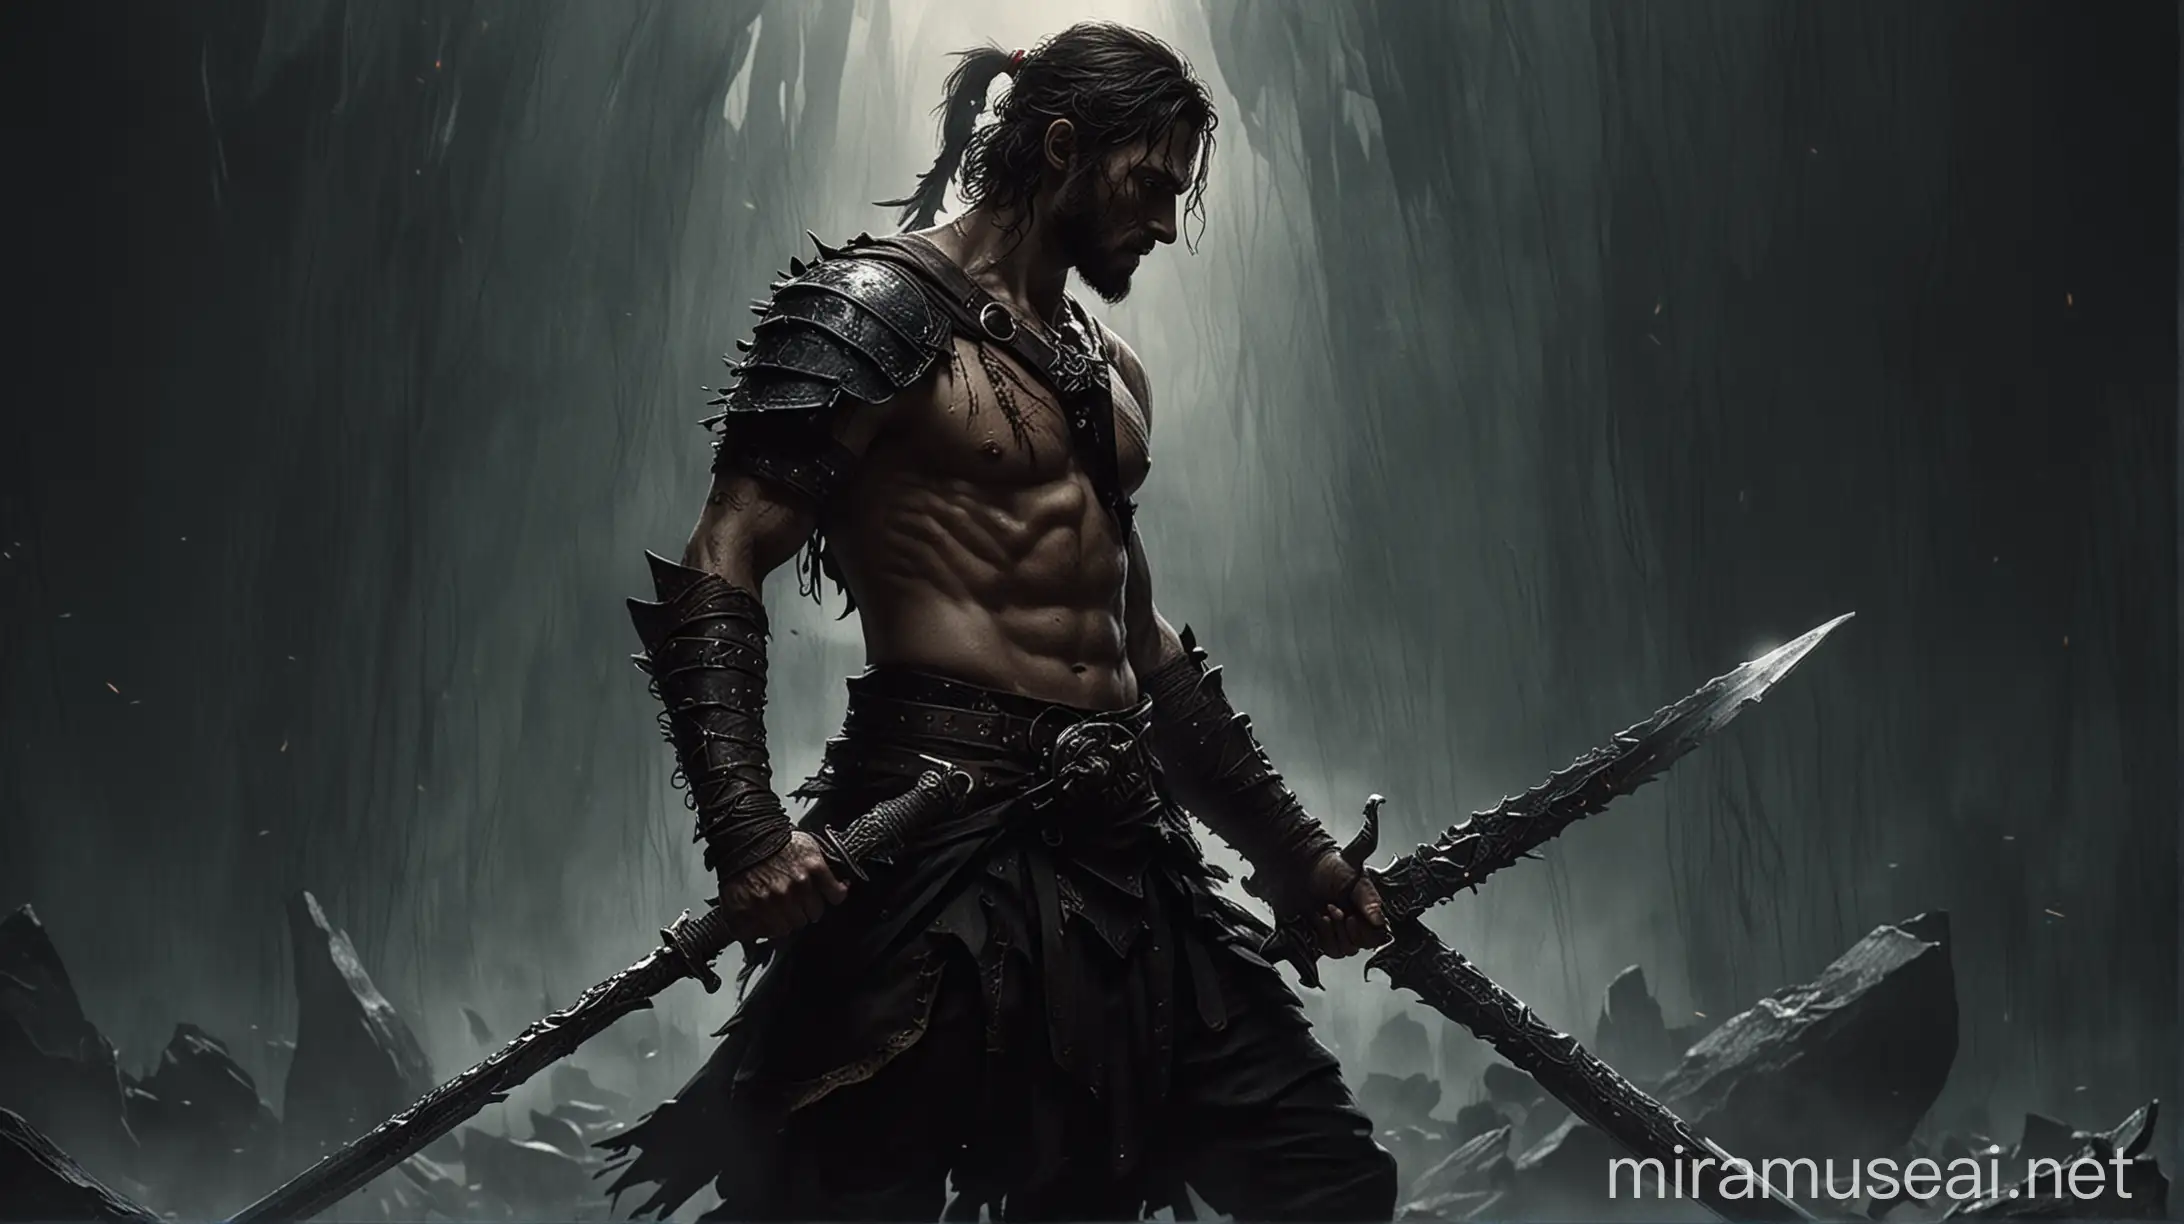 The warrior, amazed by the words of the Darkness, took the dagger and felt its weight. He realized that his darkness was not an enemy, but a part of his essence that made him stronger.